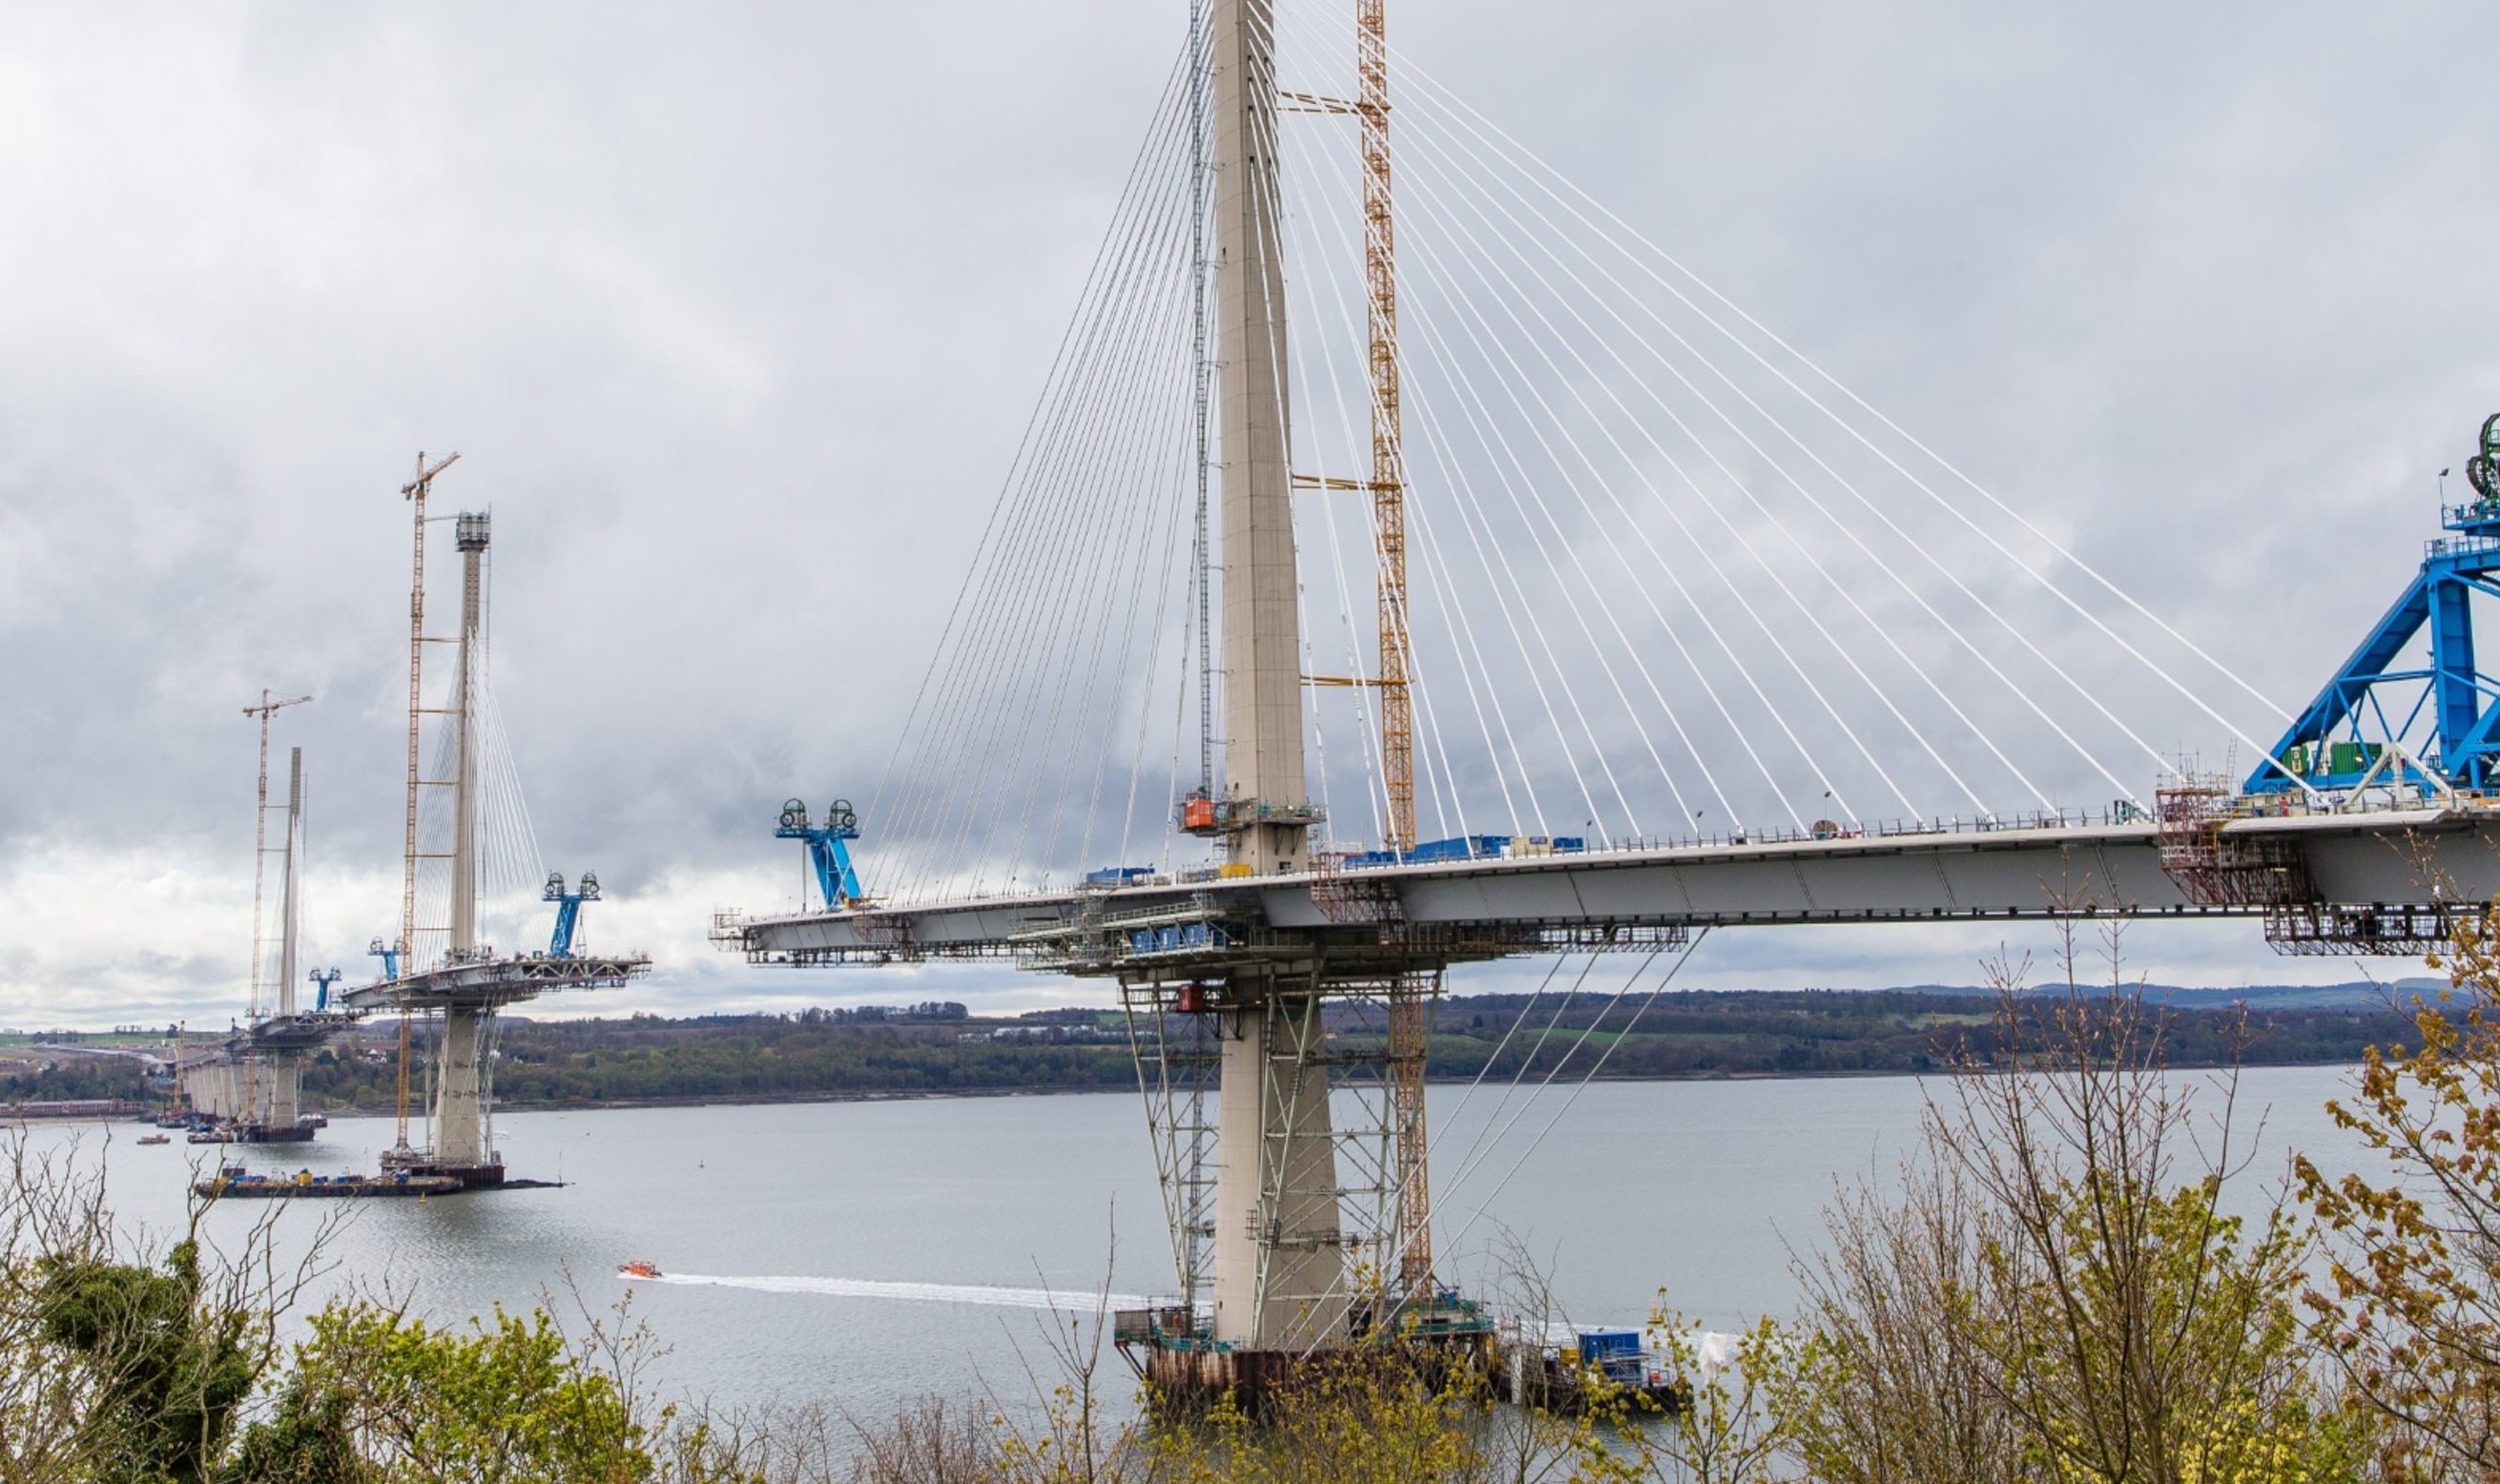 North Tower at the Queensferry Crossing Bridge